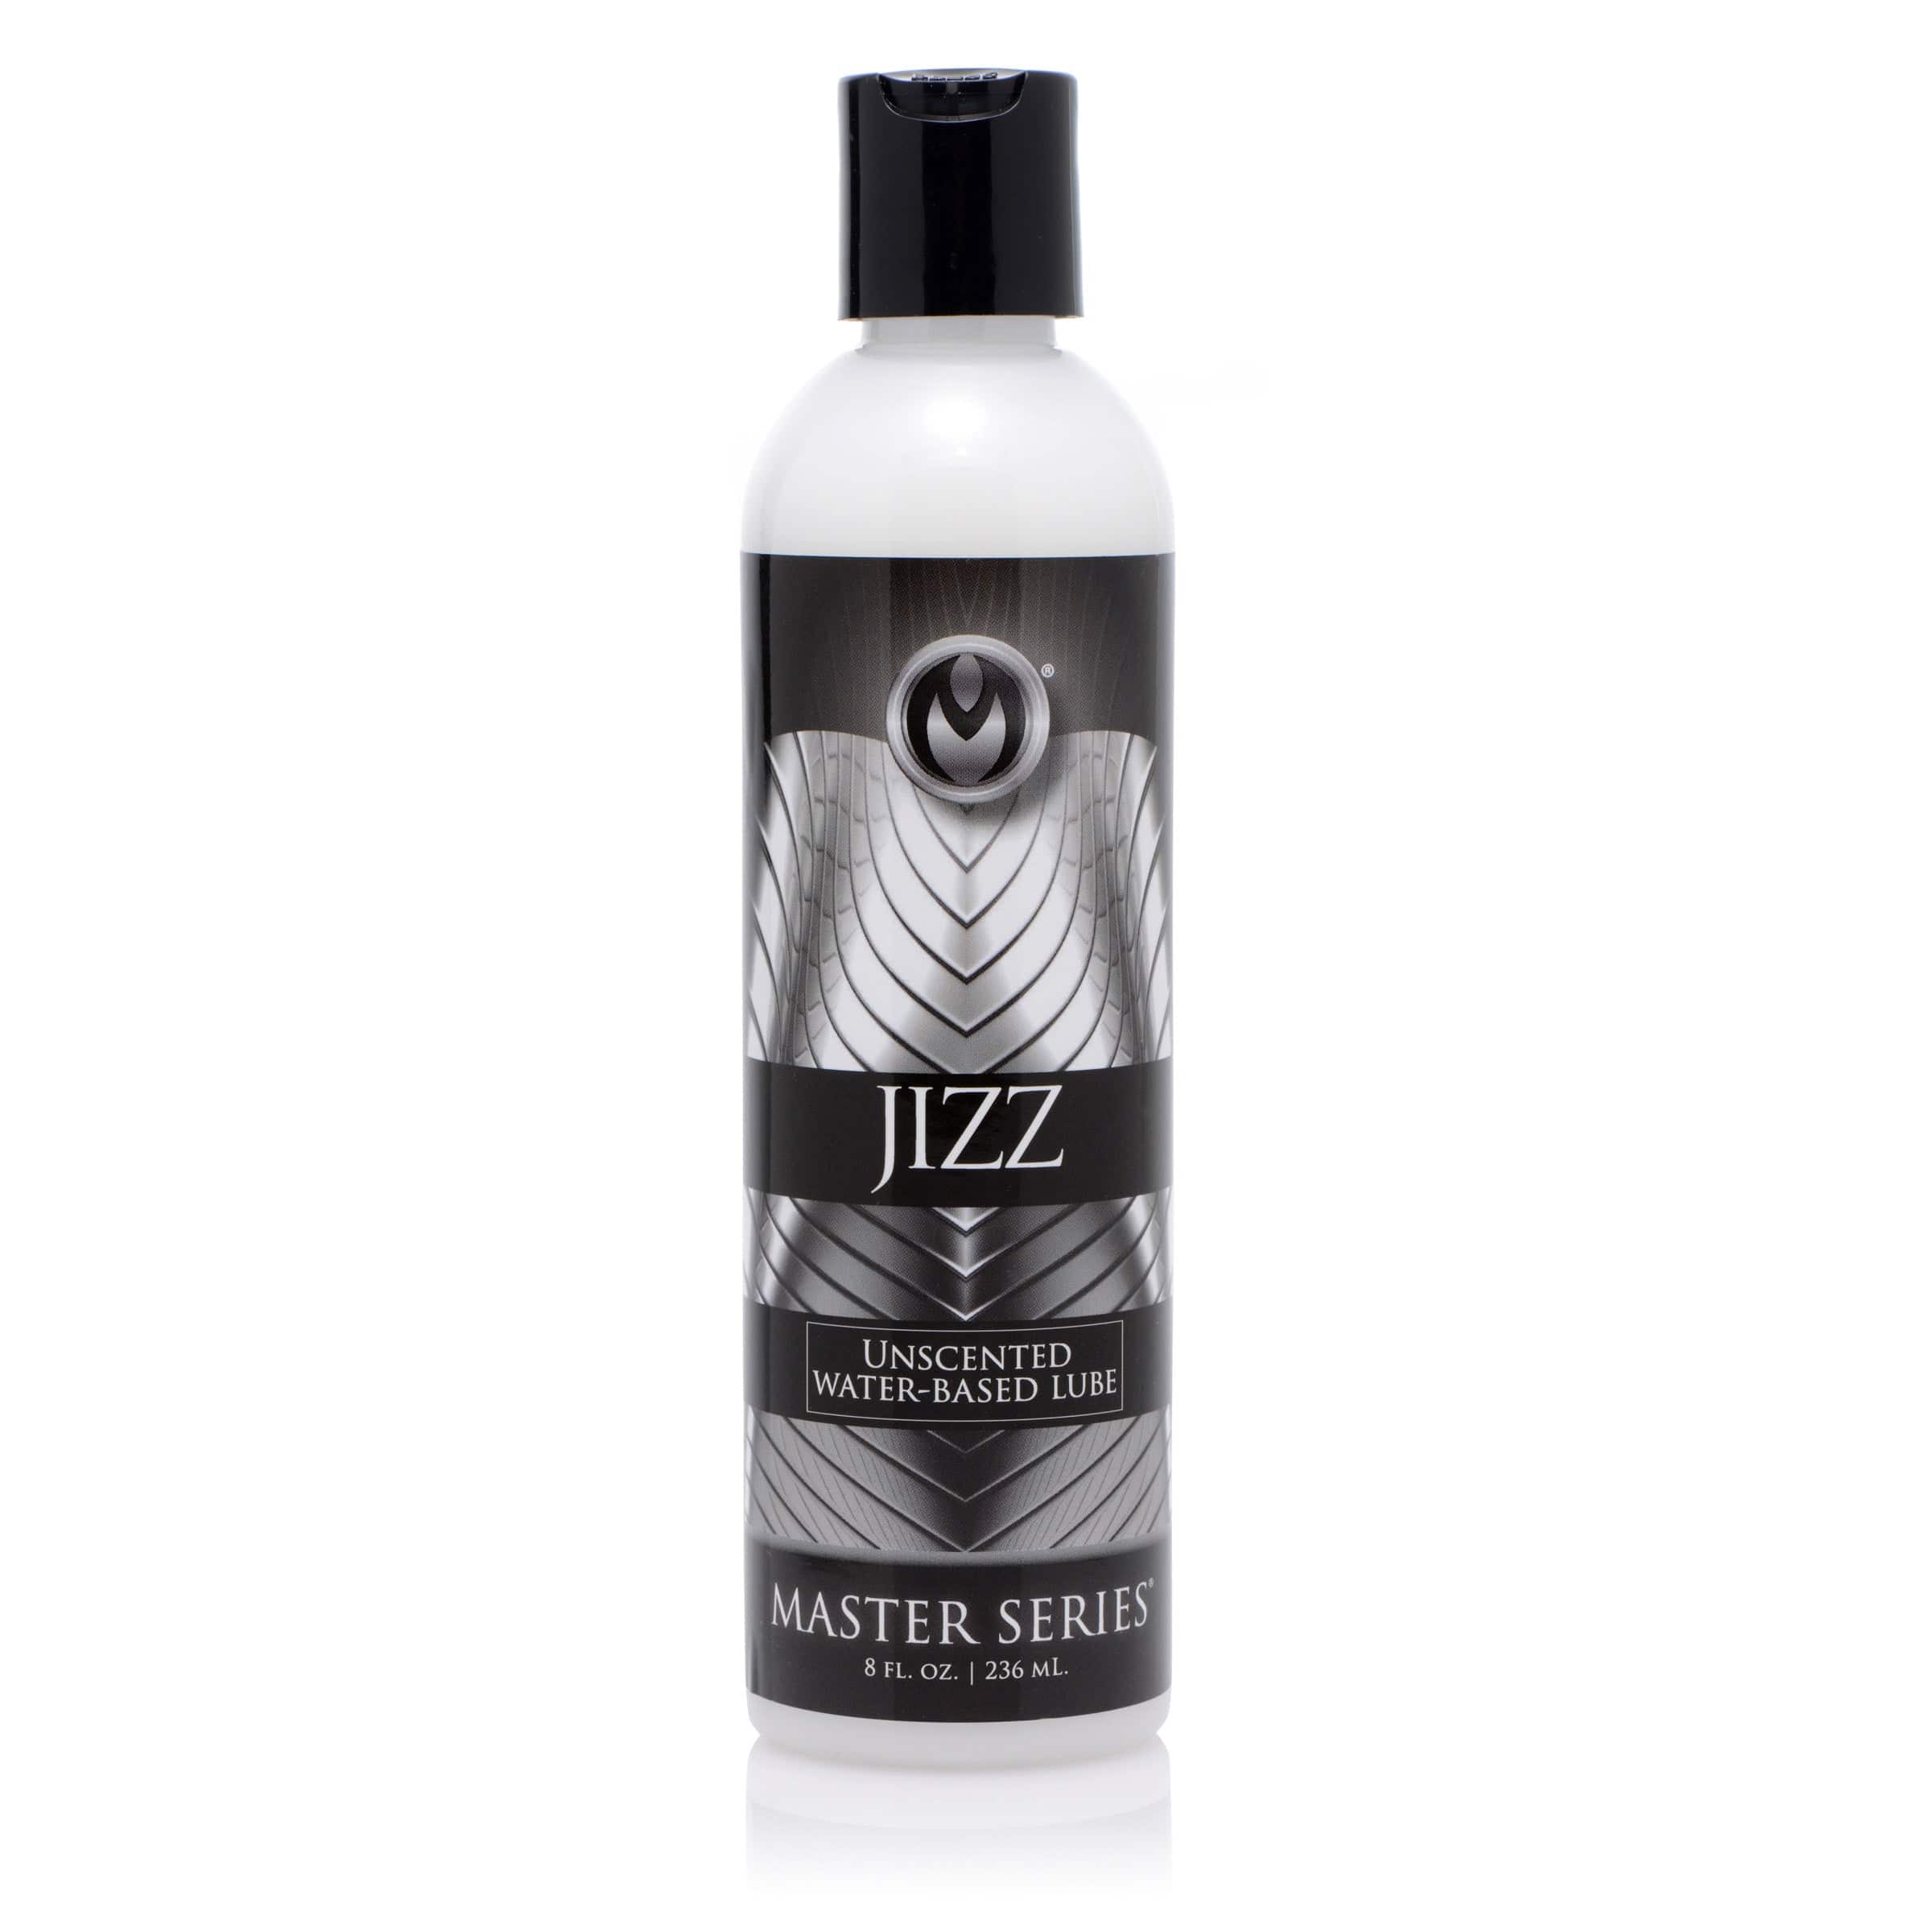 Master Series Water Based Lubricant 8 oz. Master Series Jizz Unscented Water-Based Lube at the Haus of Shag